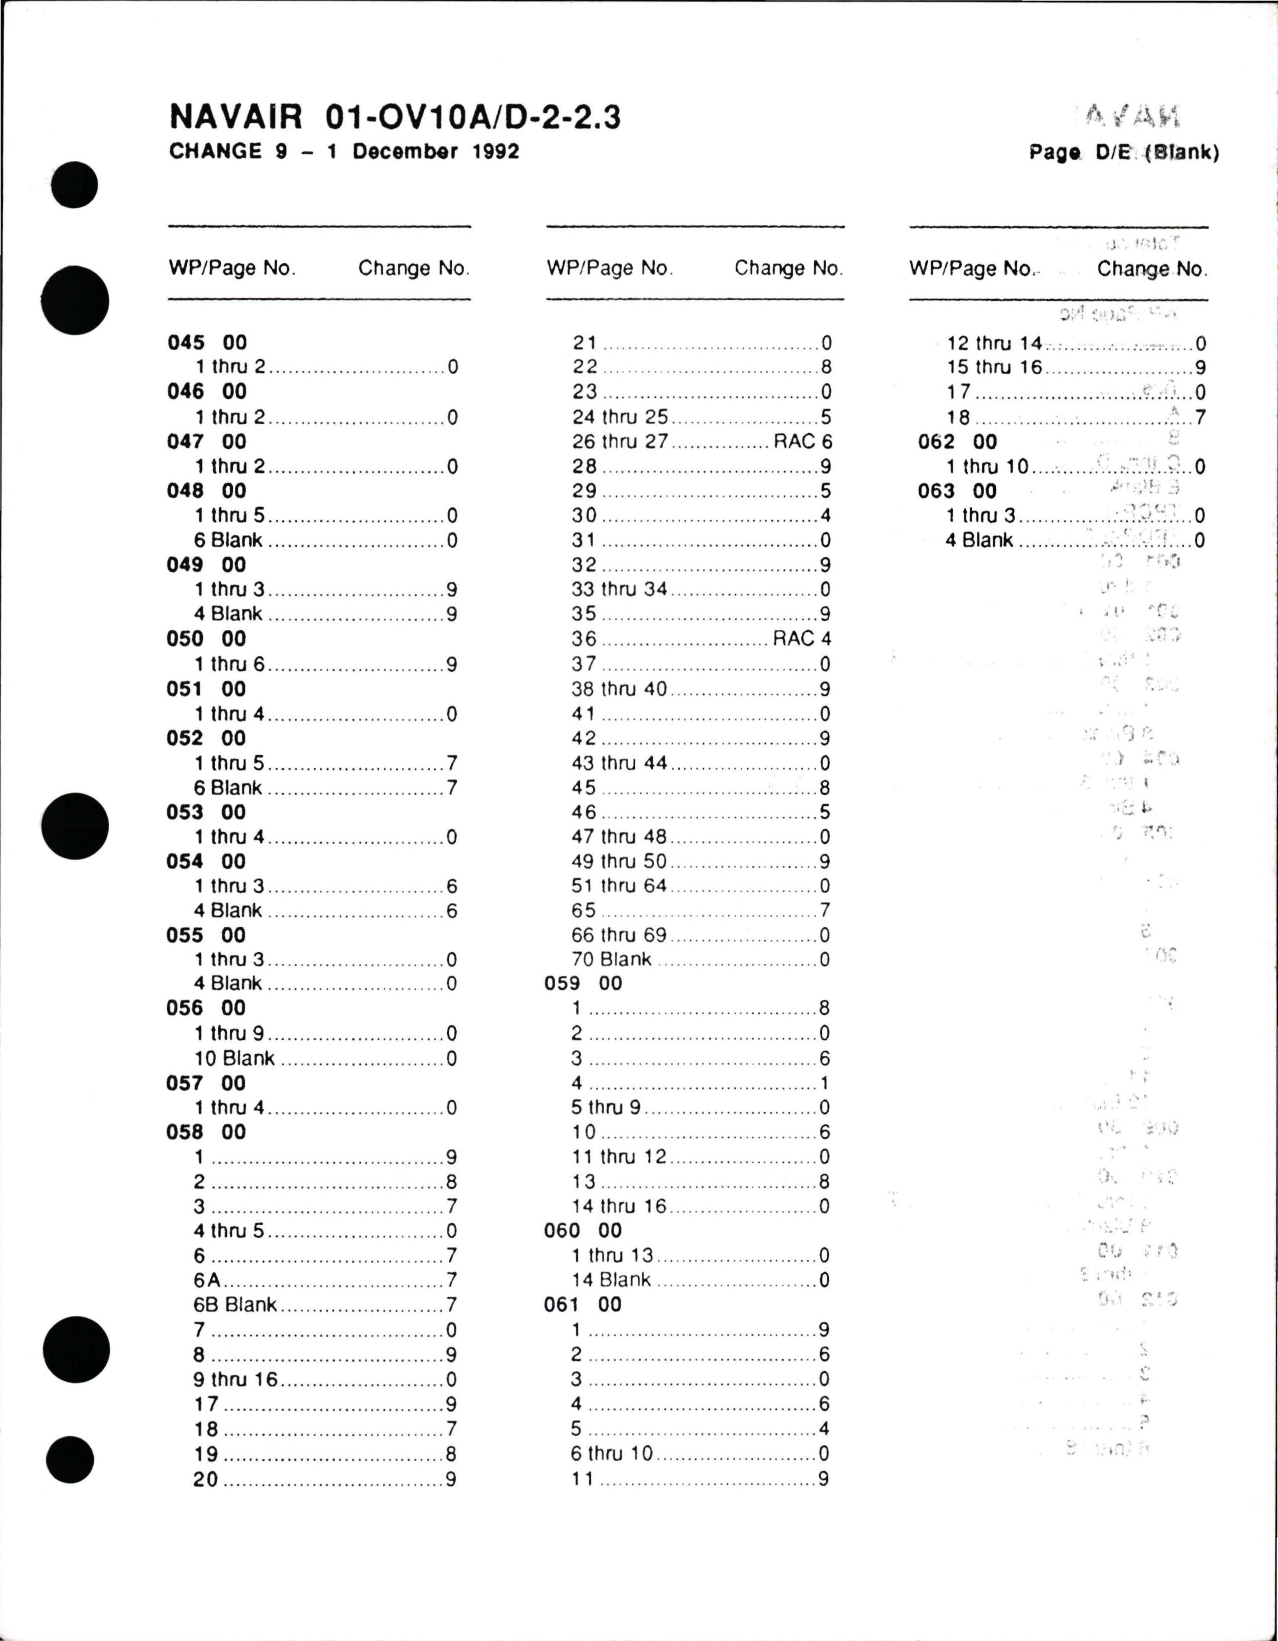 Sample page 5 from AirCorps Library document: Organizational Maintenance with Illustrated Parts Breakdown for Landing Gear and Related Systems for OV-10A/D 